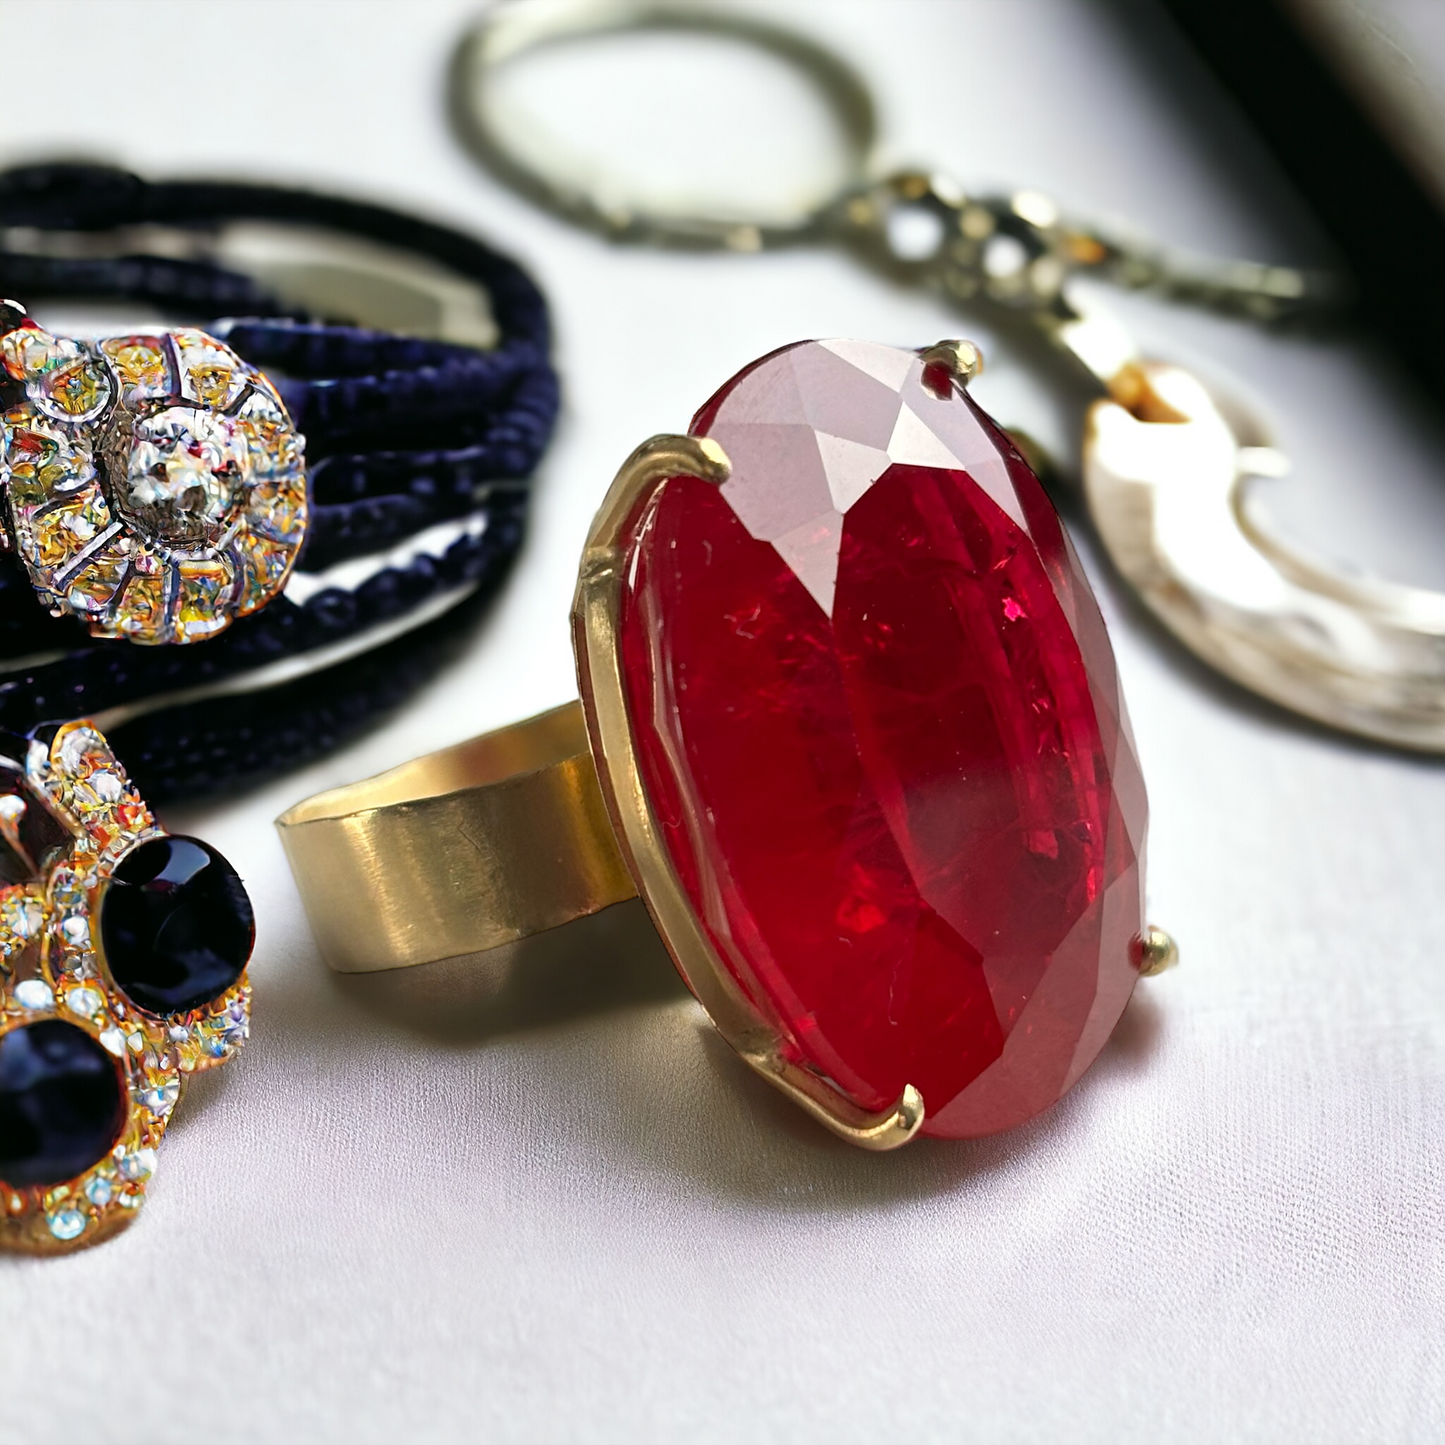 18k Yellow Gold Rubellite Ring, Oval Rubellite and wide band ring surrounded by other jewels